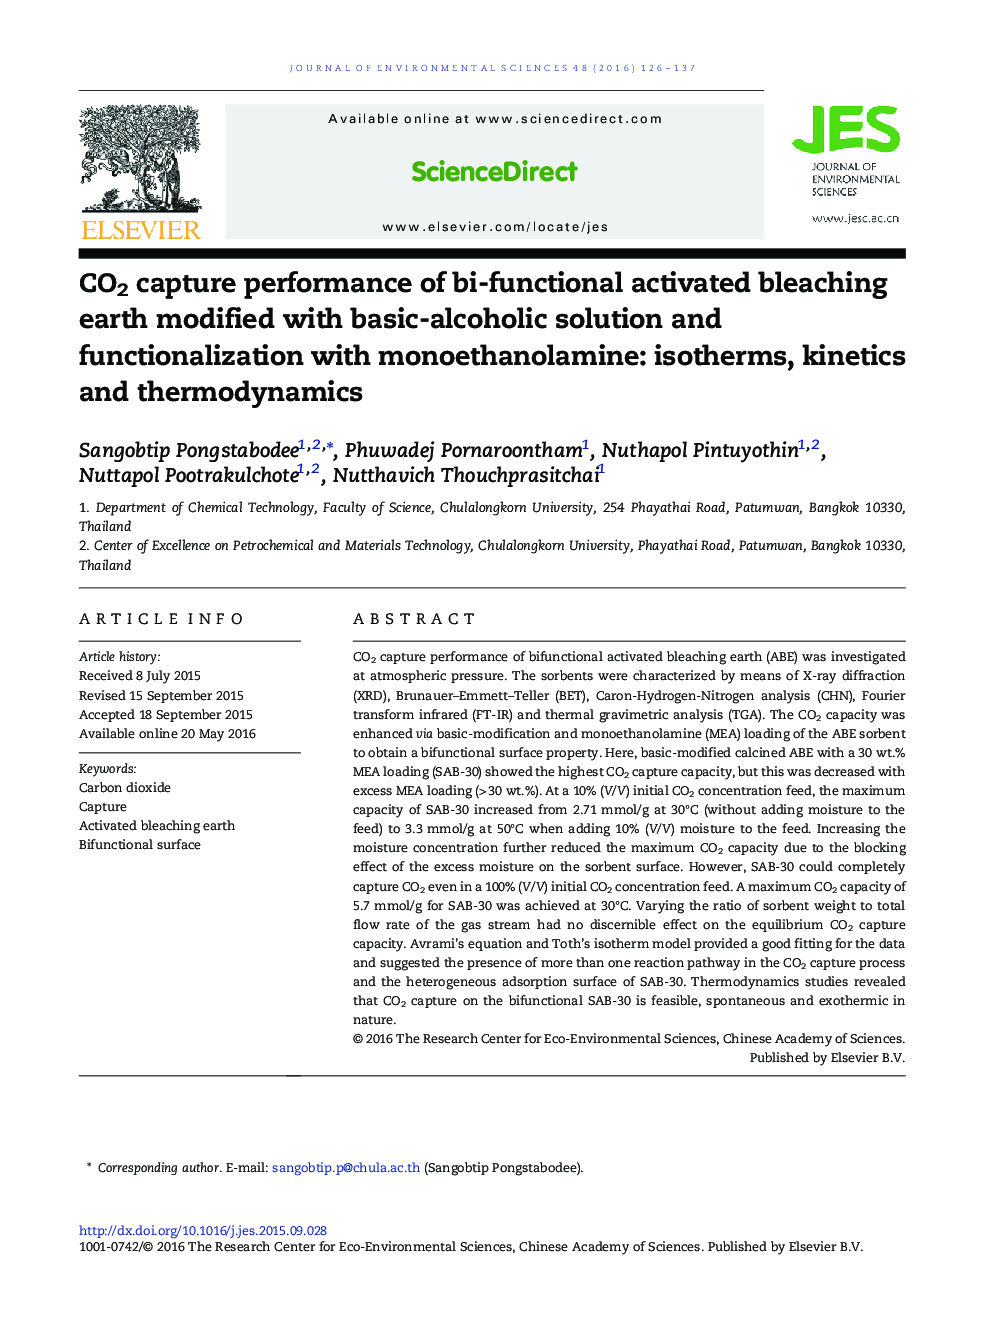 CO2 capture performance of bi-functional activated bleaching earth modified with basic-alcoholic solution and functionalization with monoethanolamine: isotherms, kinetics and thermodynamics